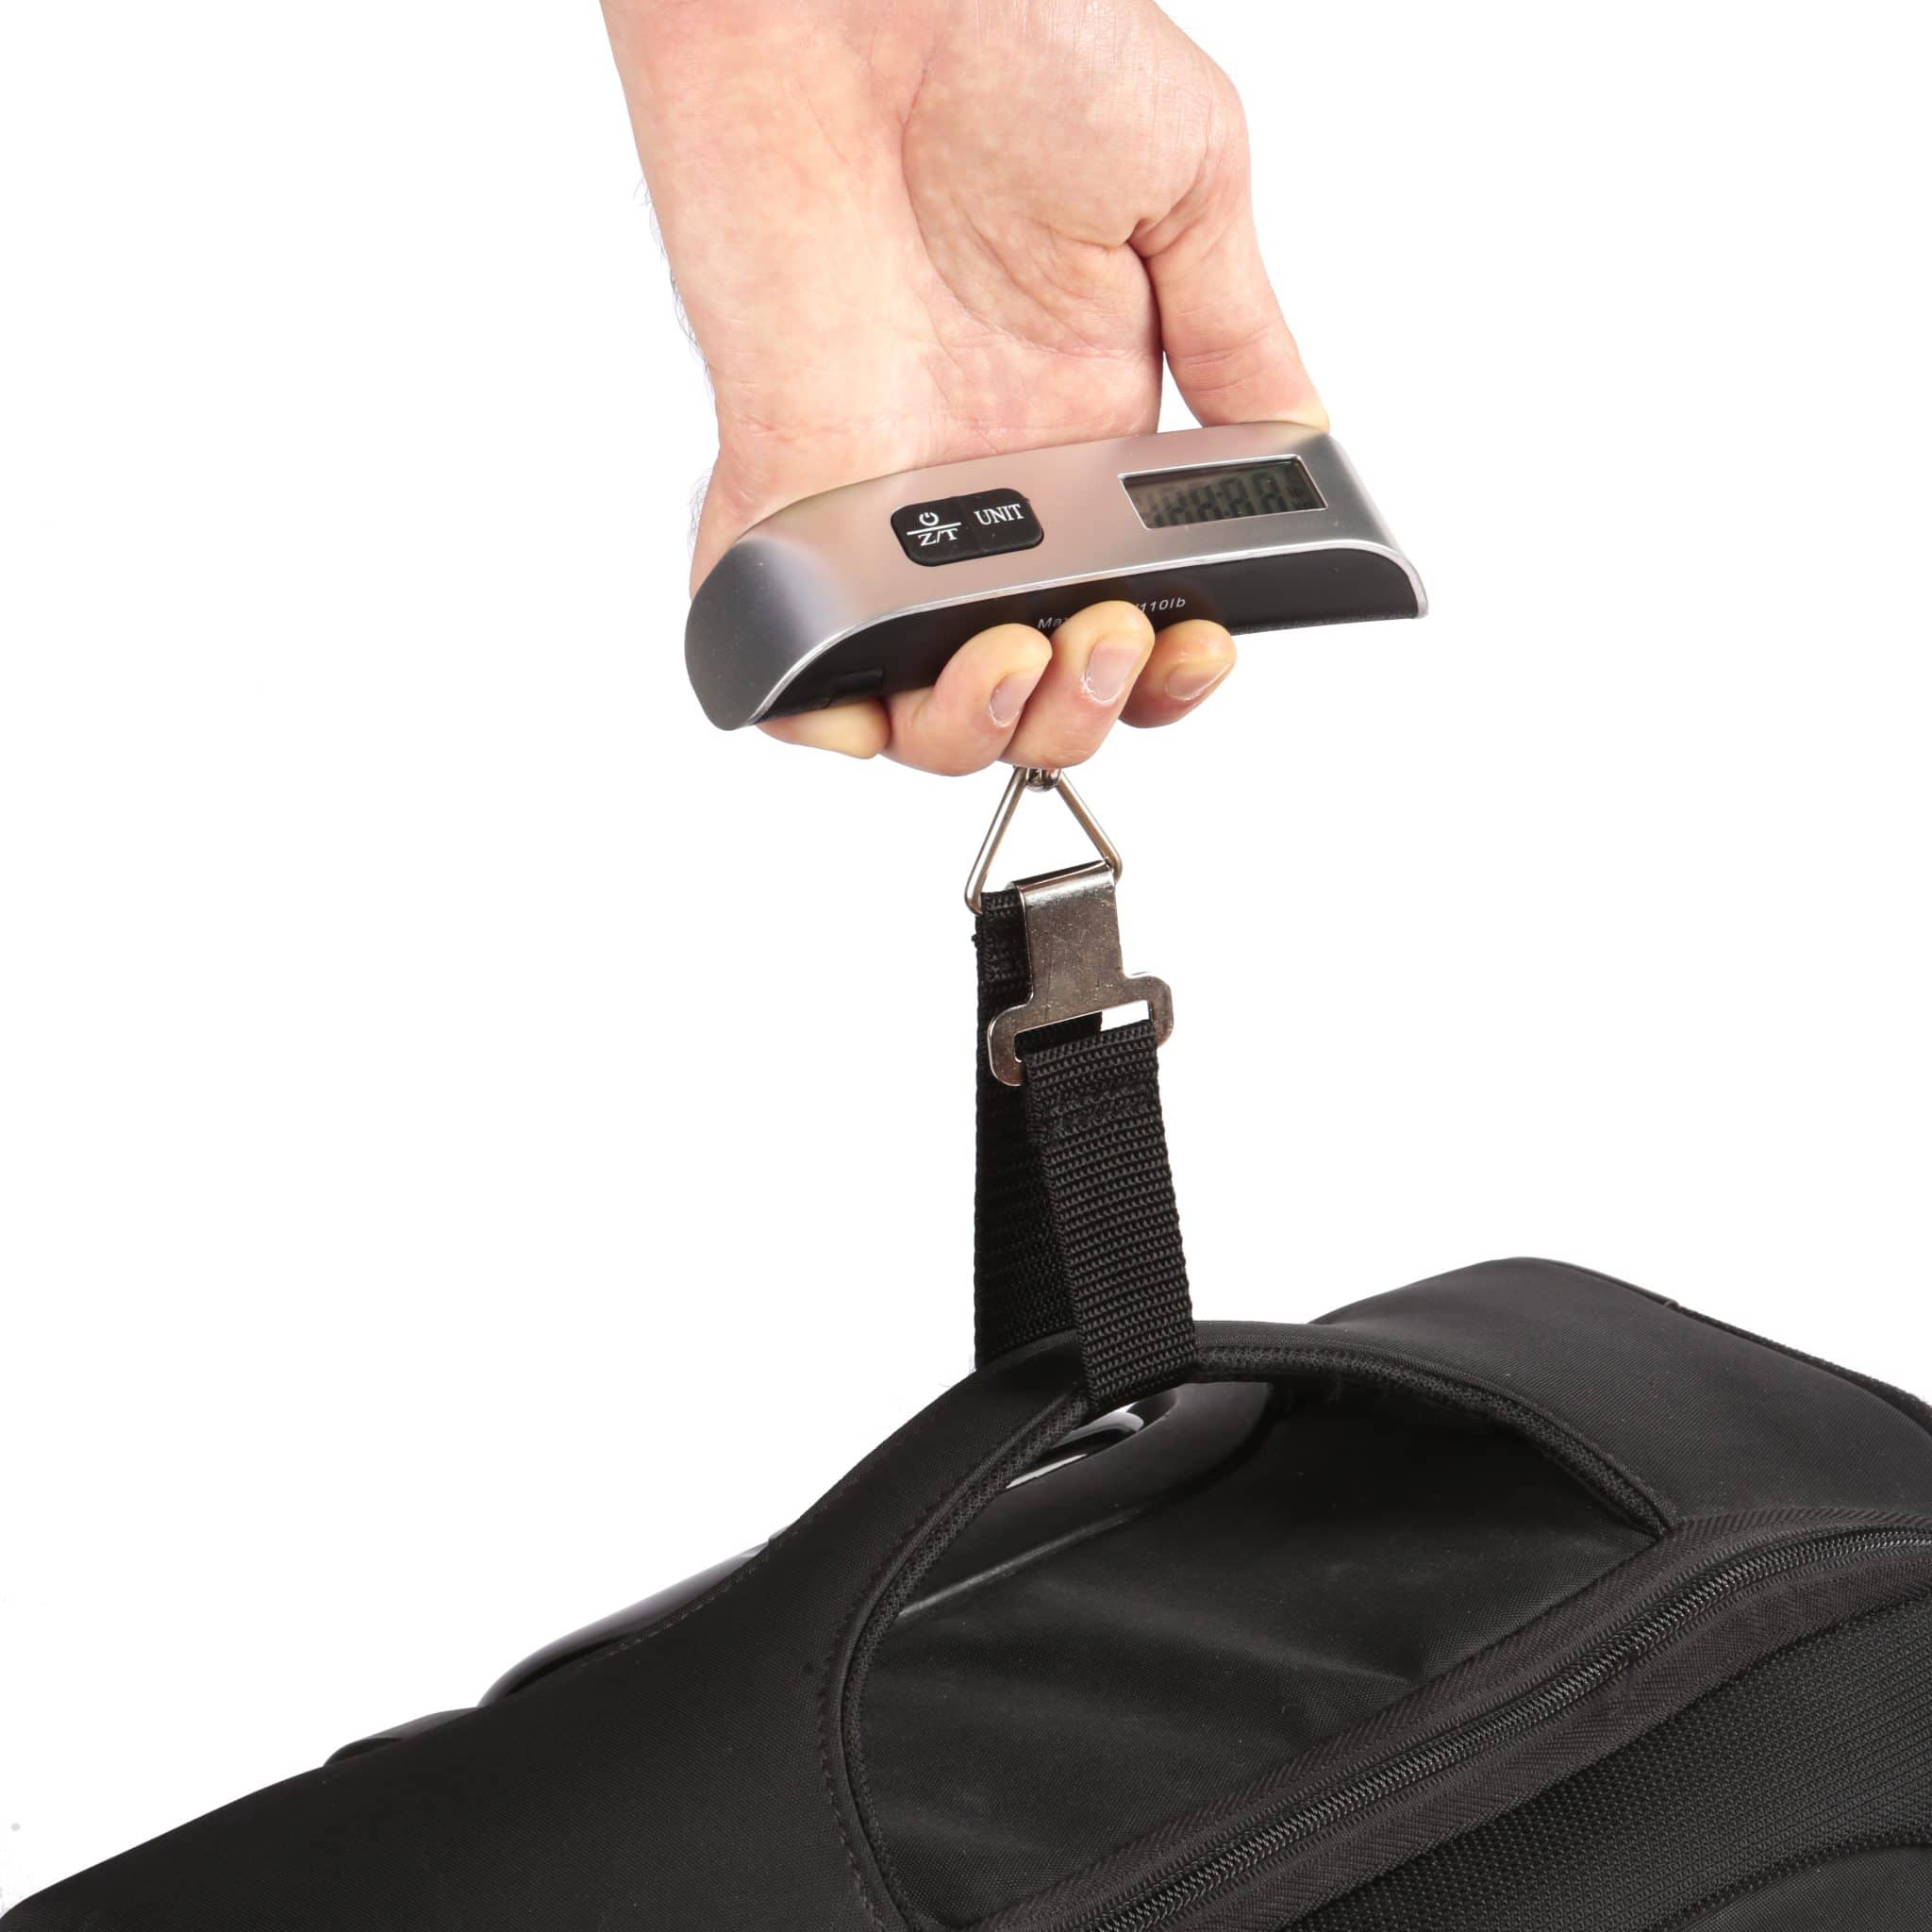 https://www.epictraveller.co/wp-content/uploads/2017/04/Luggage-Scales-3-scaled.jpg